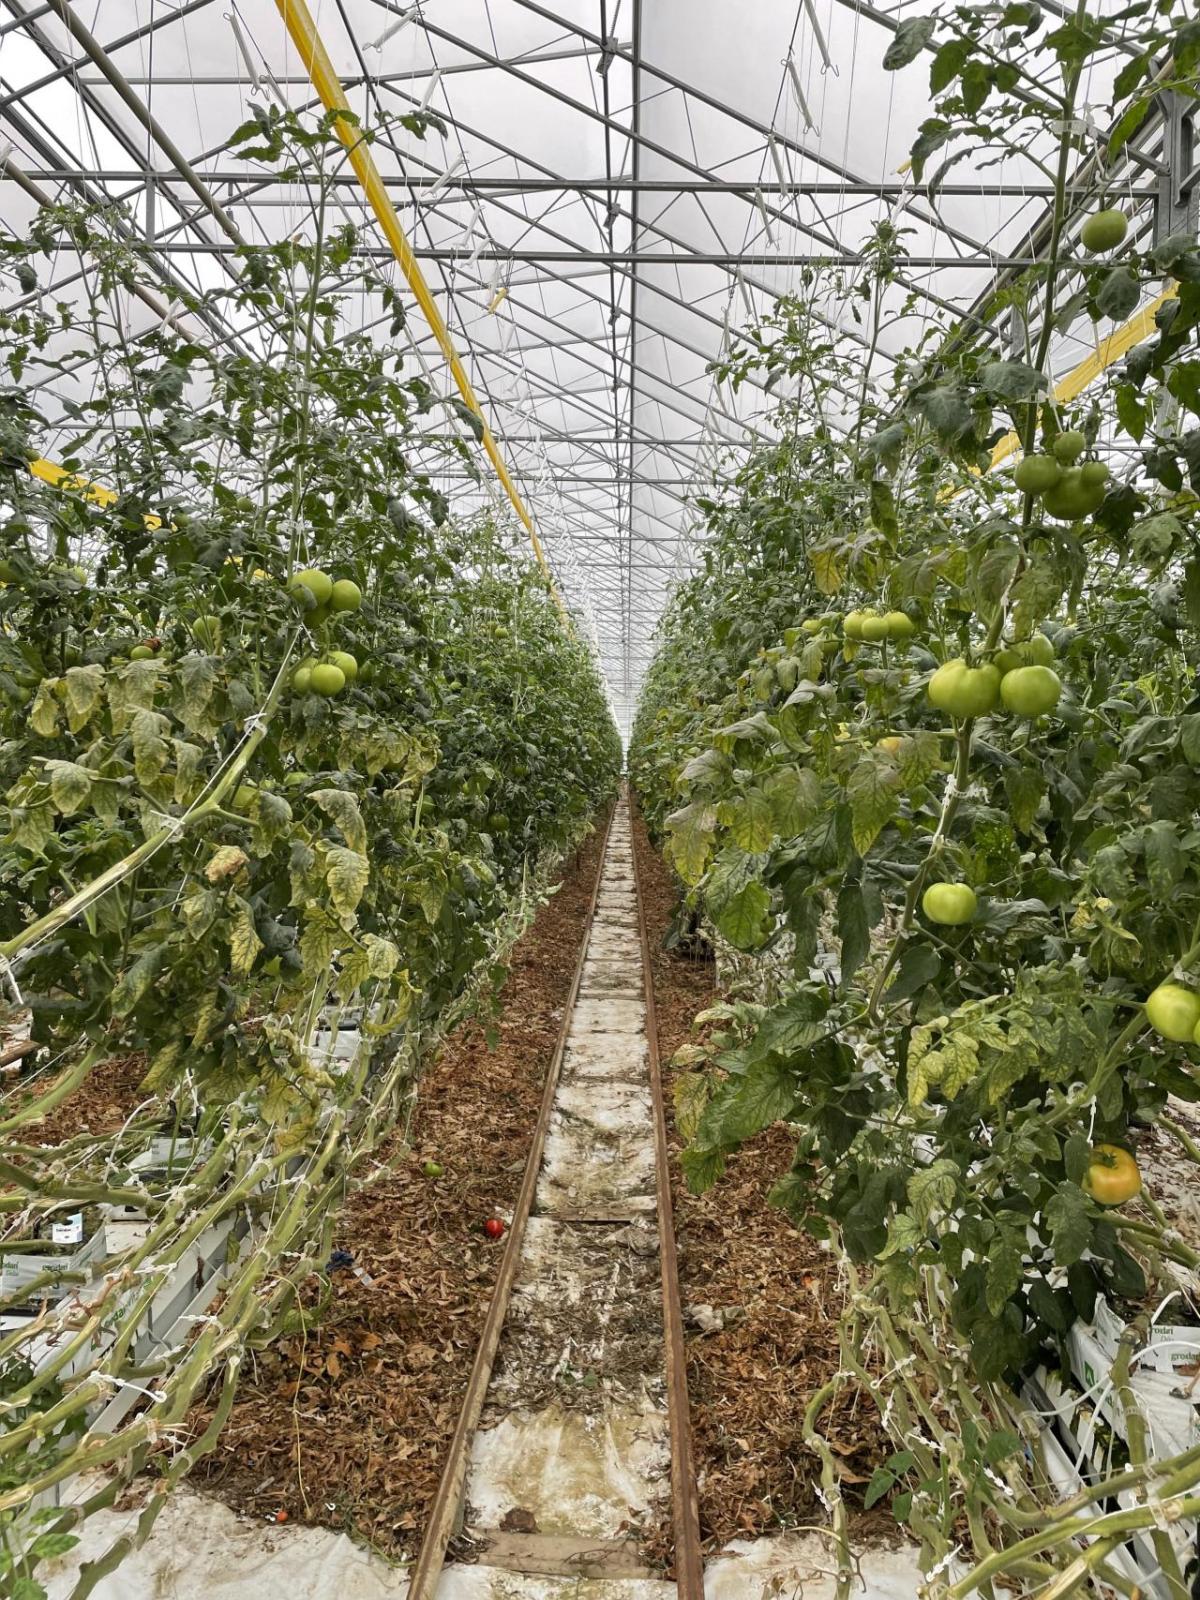 Inside of greenhouse